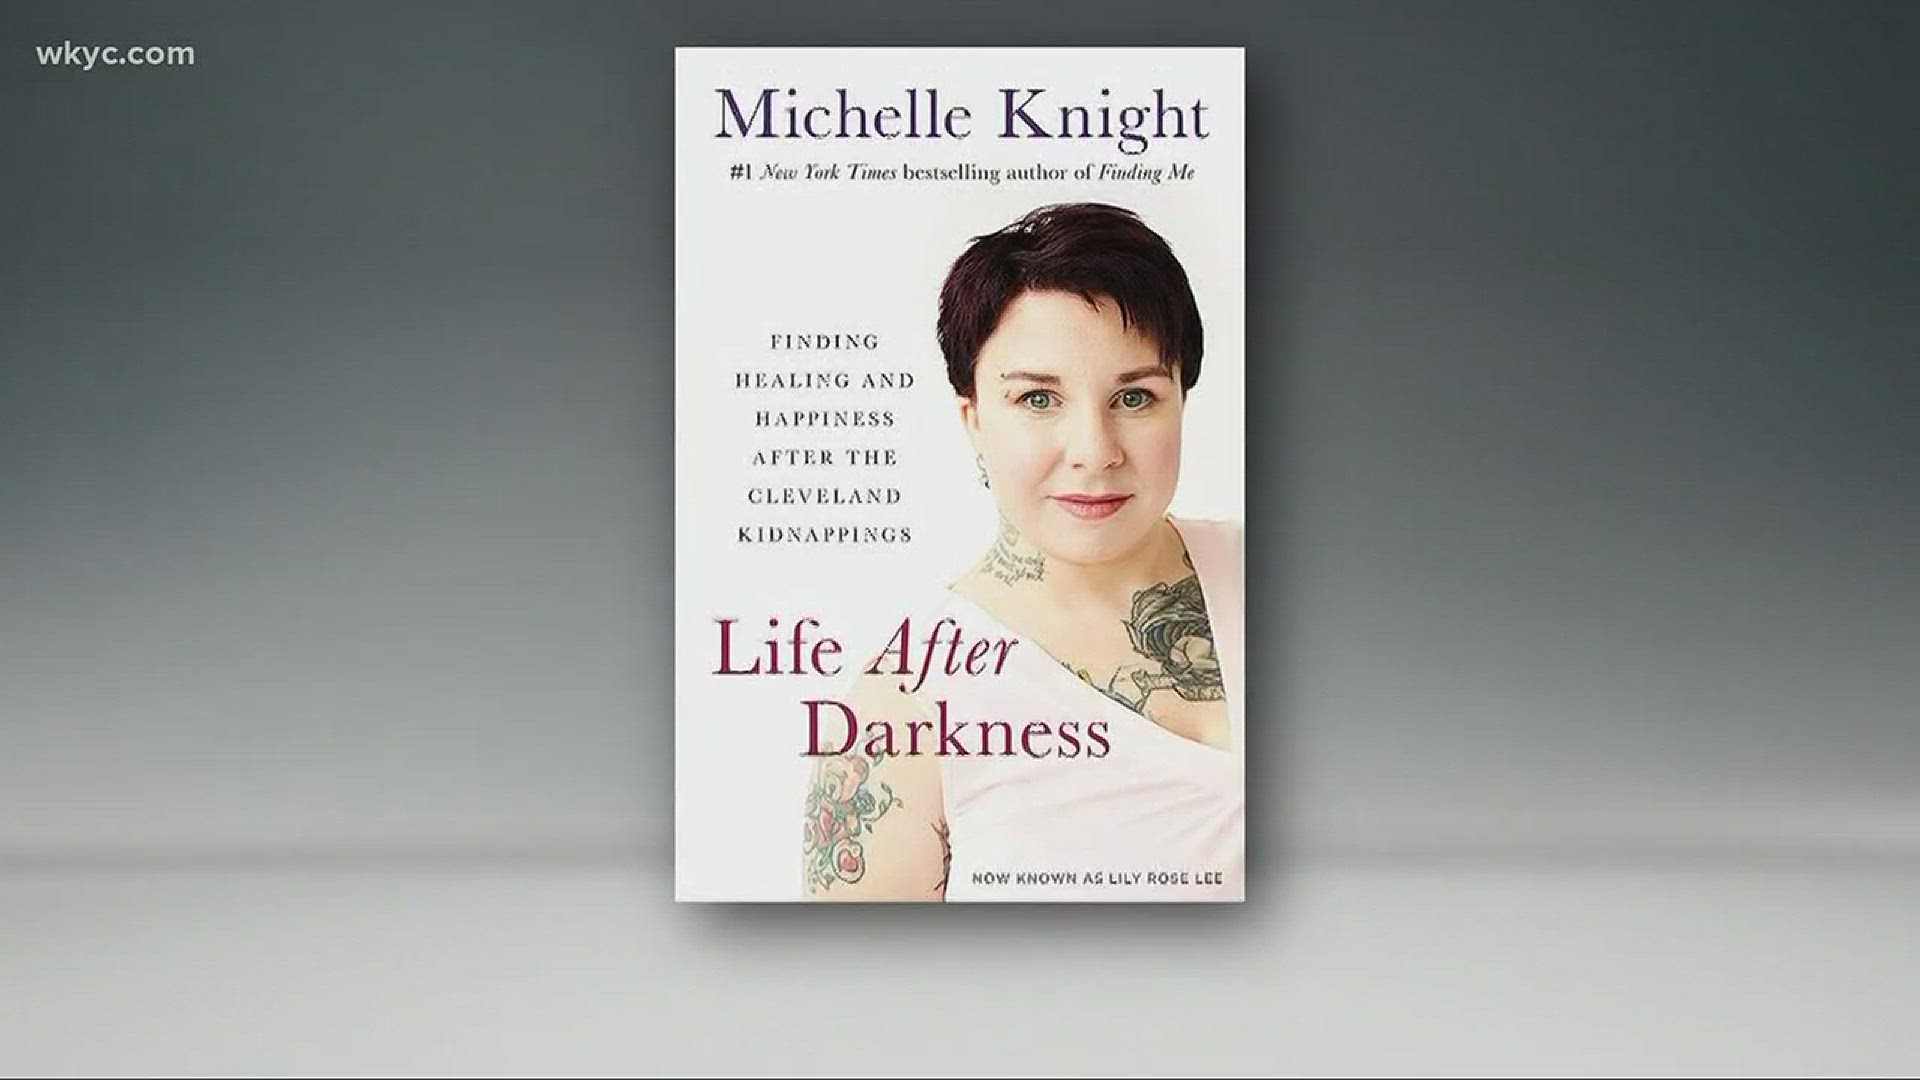 Jan. 10, 2018: Knight, who now goes by the name Lily Rose Lee, has just revealed the cover of her new upcoming book. 'Life After Darkness' will be published on May 1.